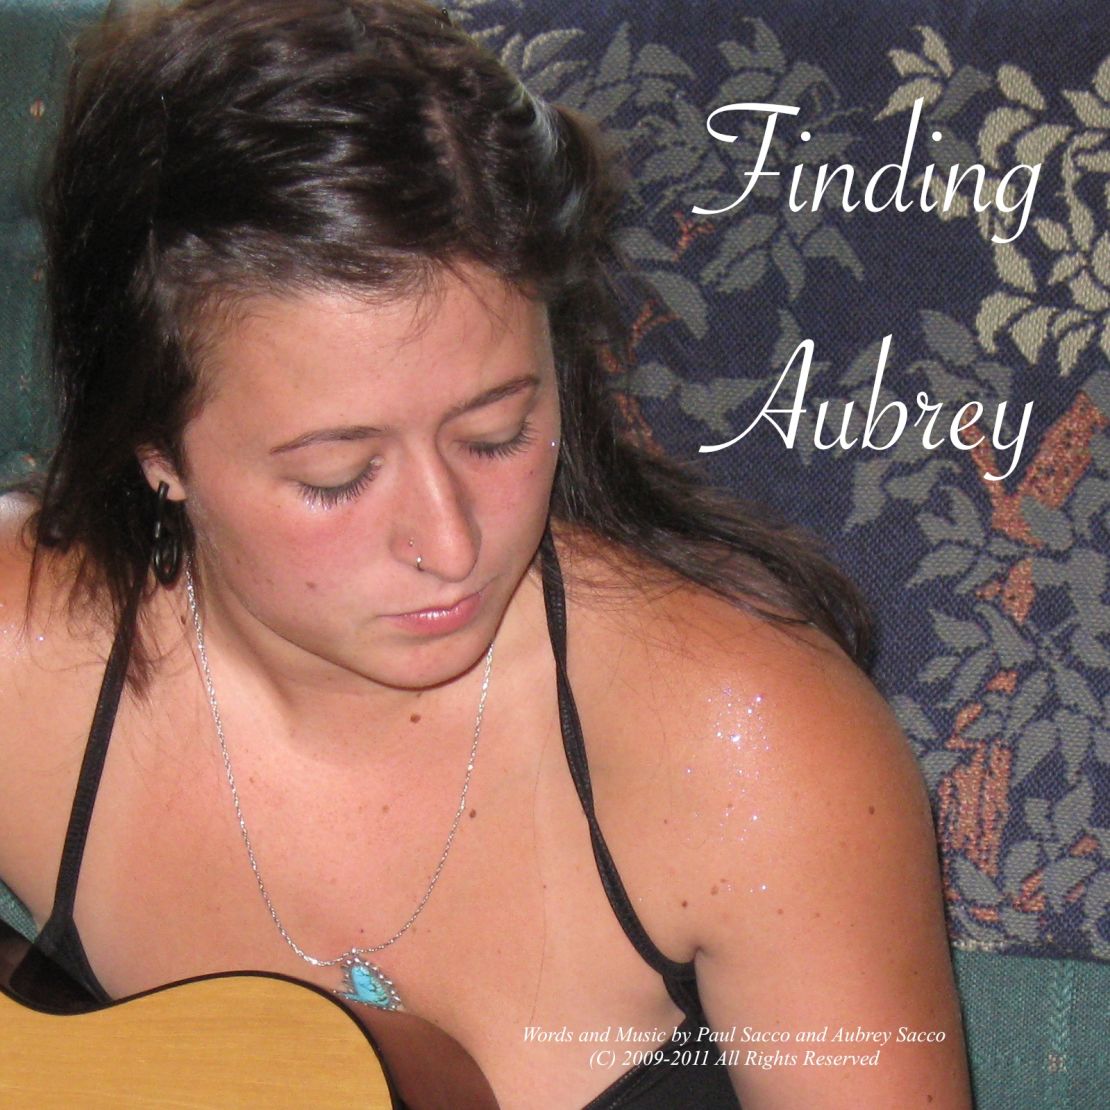 The album includes three songs that Aubrey herself recorded before she took her trip.